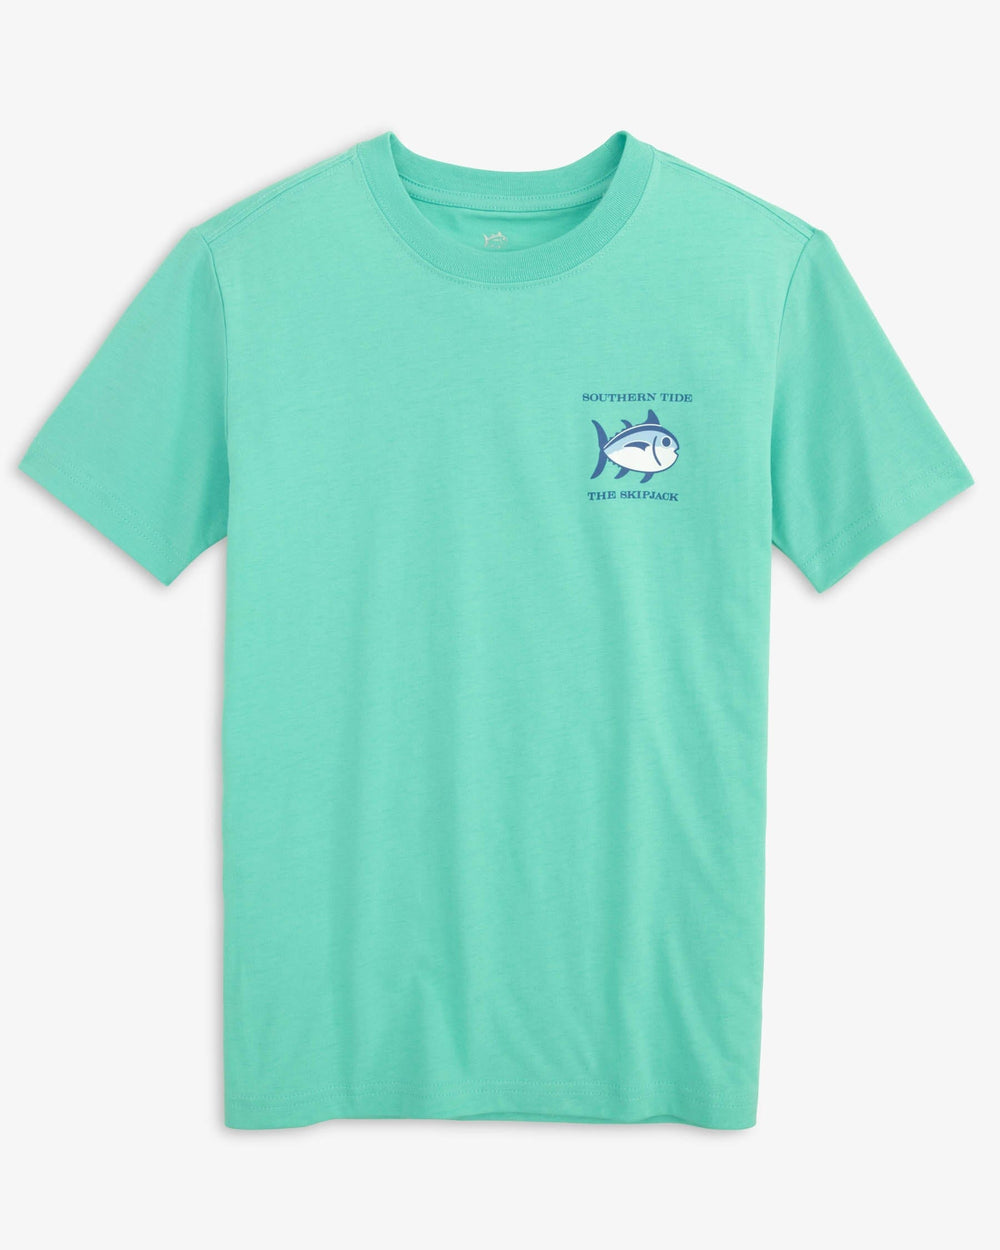 The front view of the Southern Tide Youth Original Skipjack T-Shirt by Southern Tide - Cool Mint